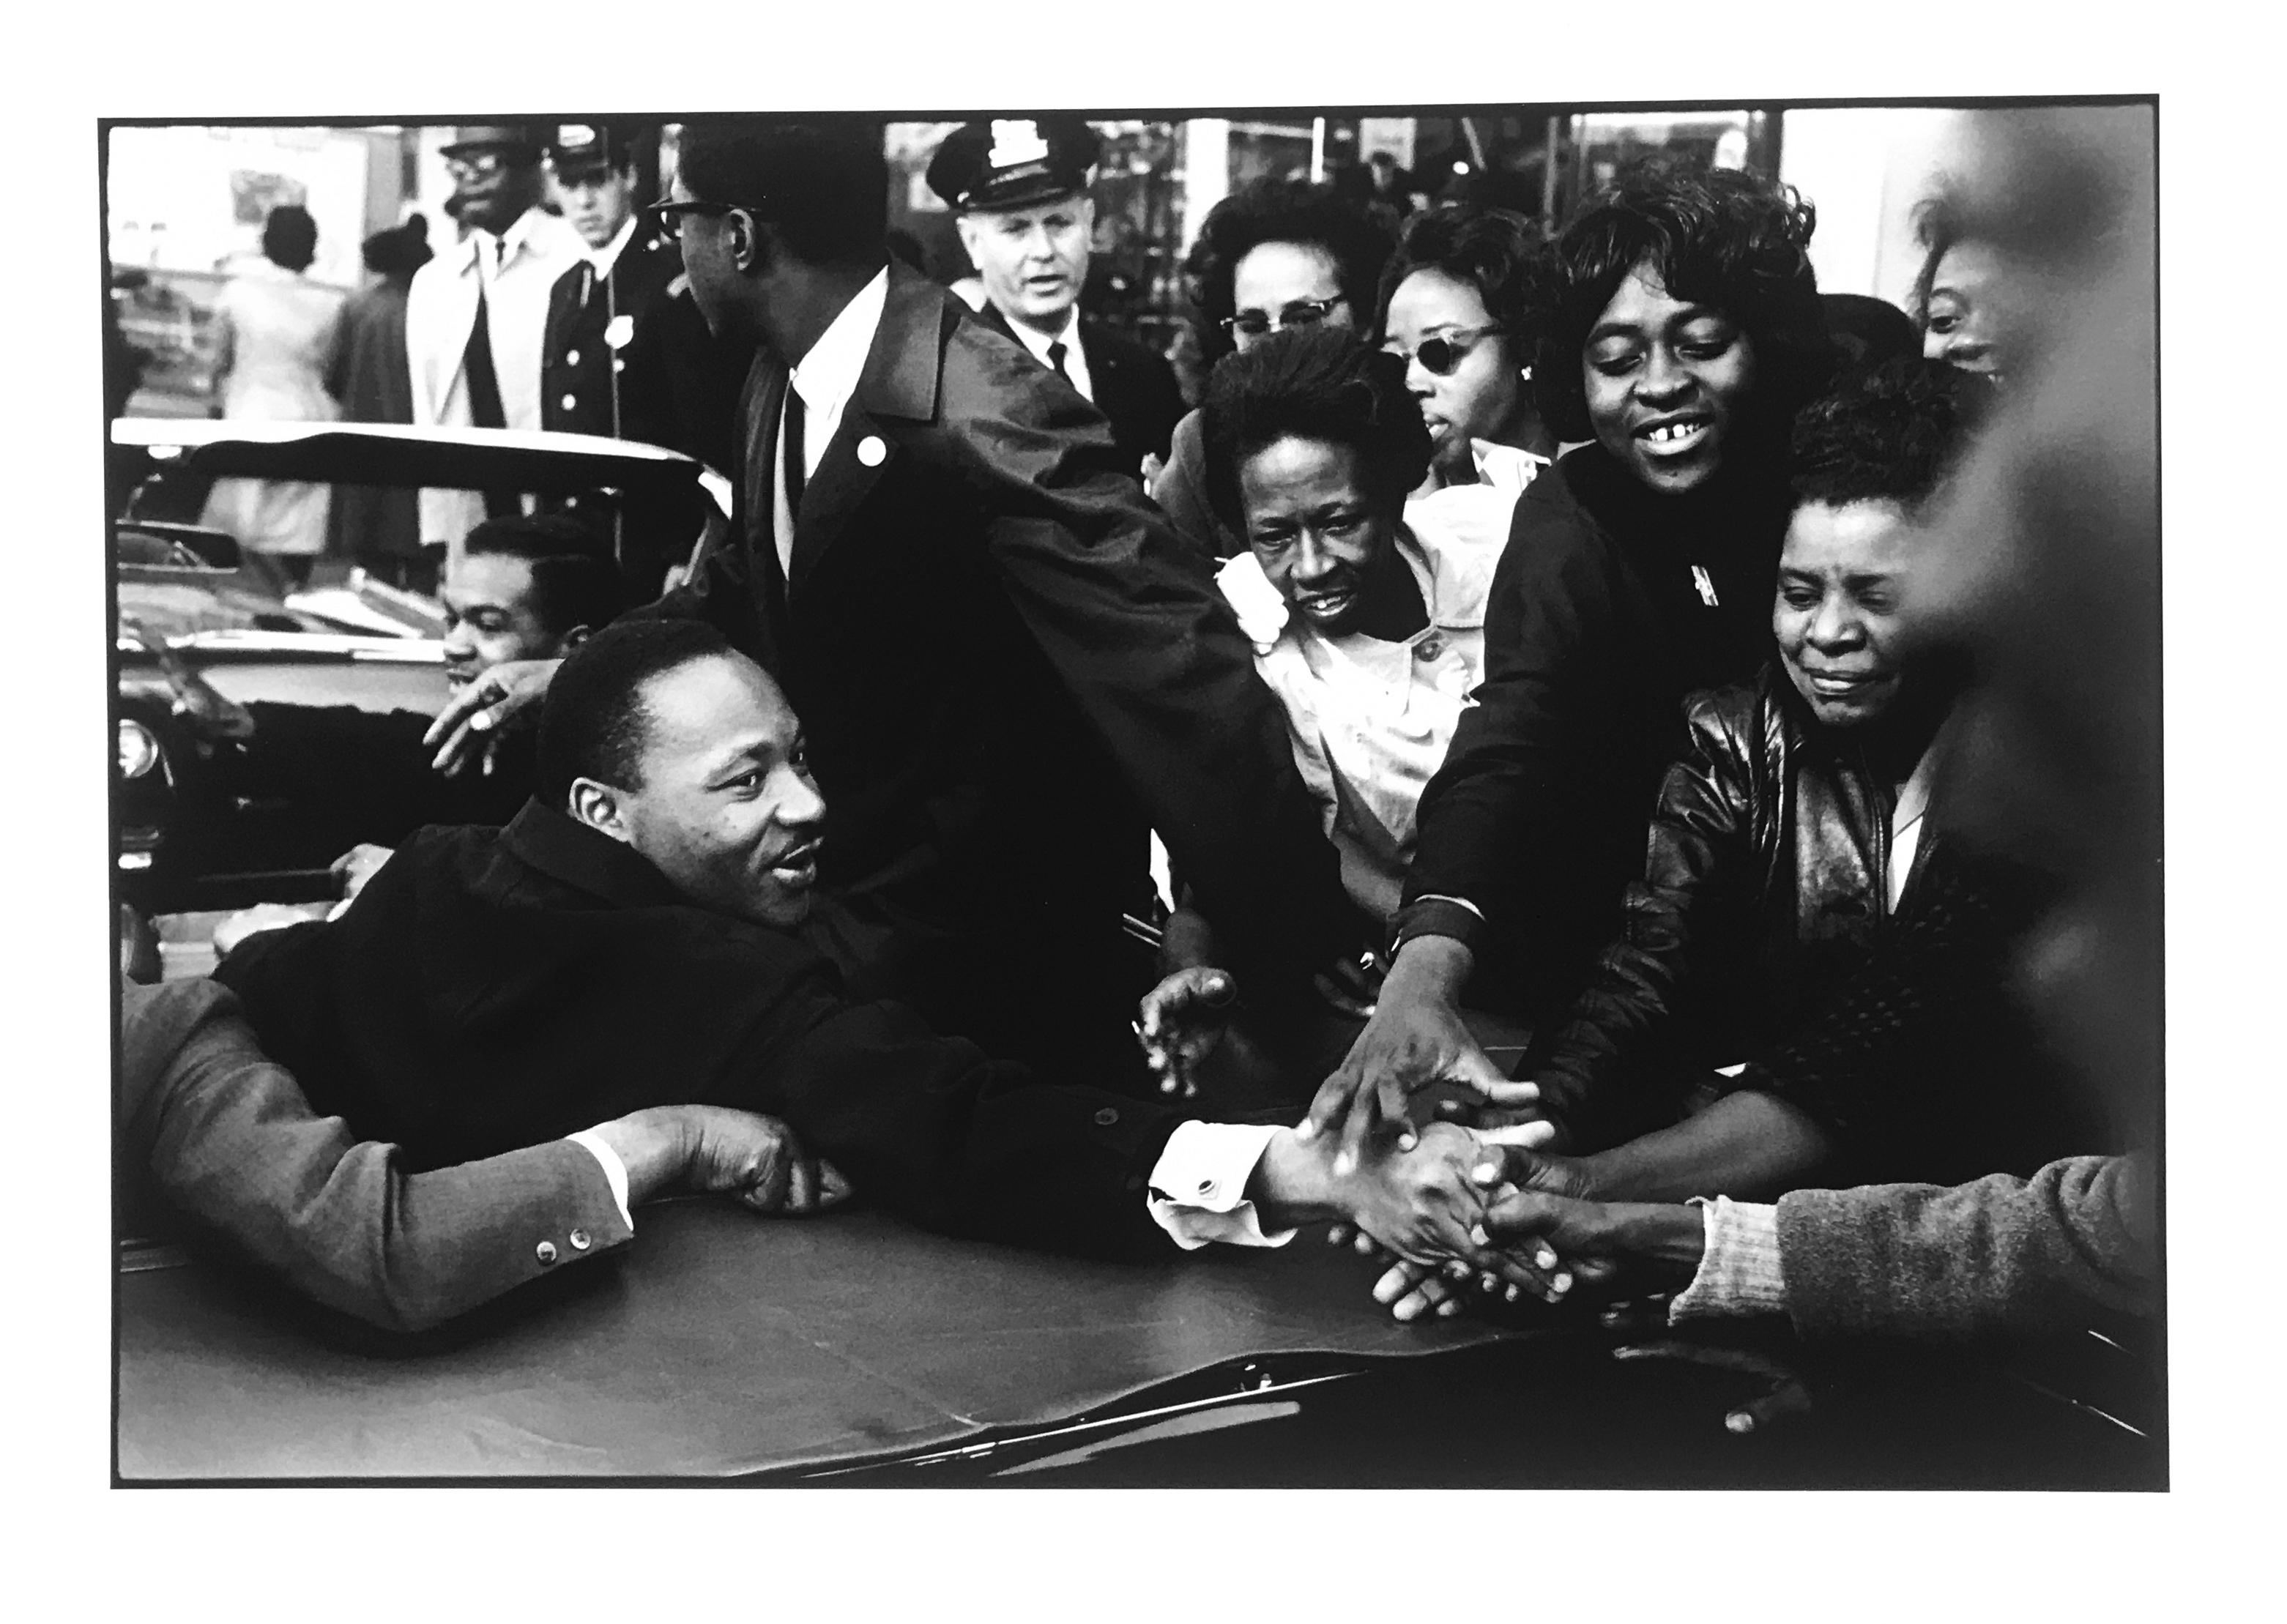 Leonard Freed Portrait Photograph - Martin Luther King, Black & White Signed Photograph of MLK, Edition 11/24